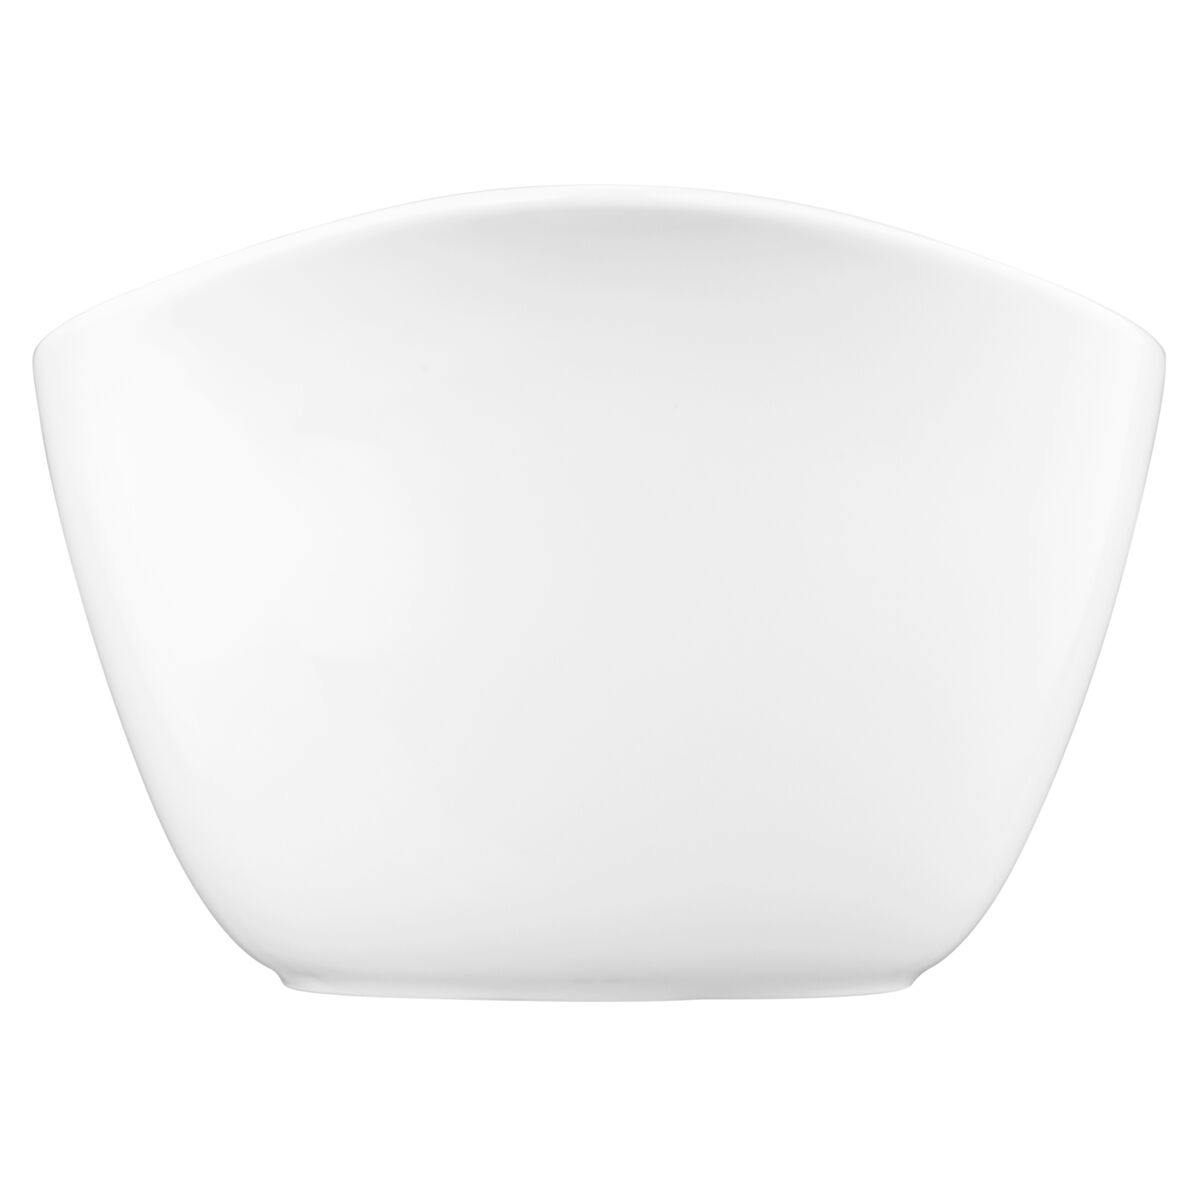 (2 pieces) Seltmann Weiden - Cereal bowl with handle - 0.6 liters